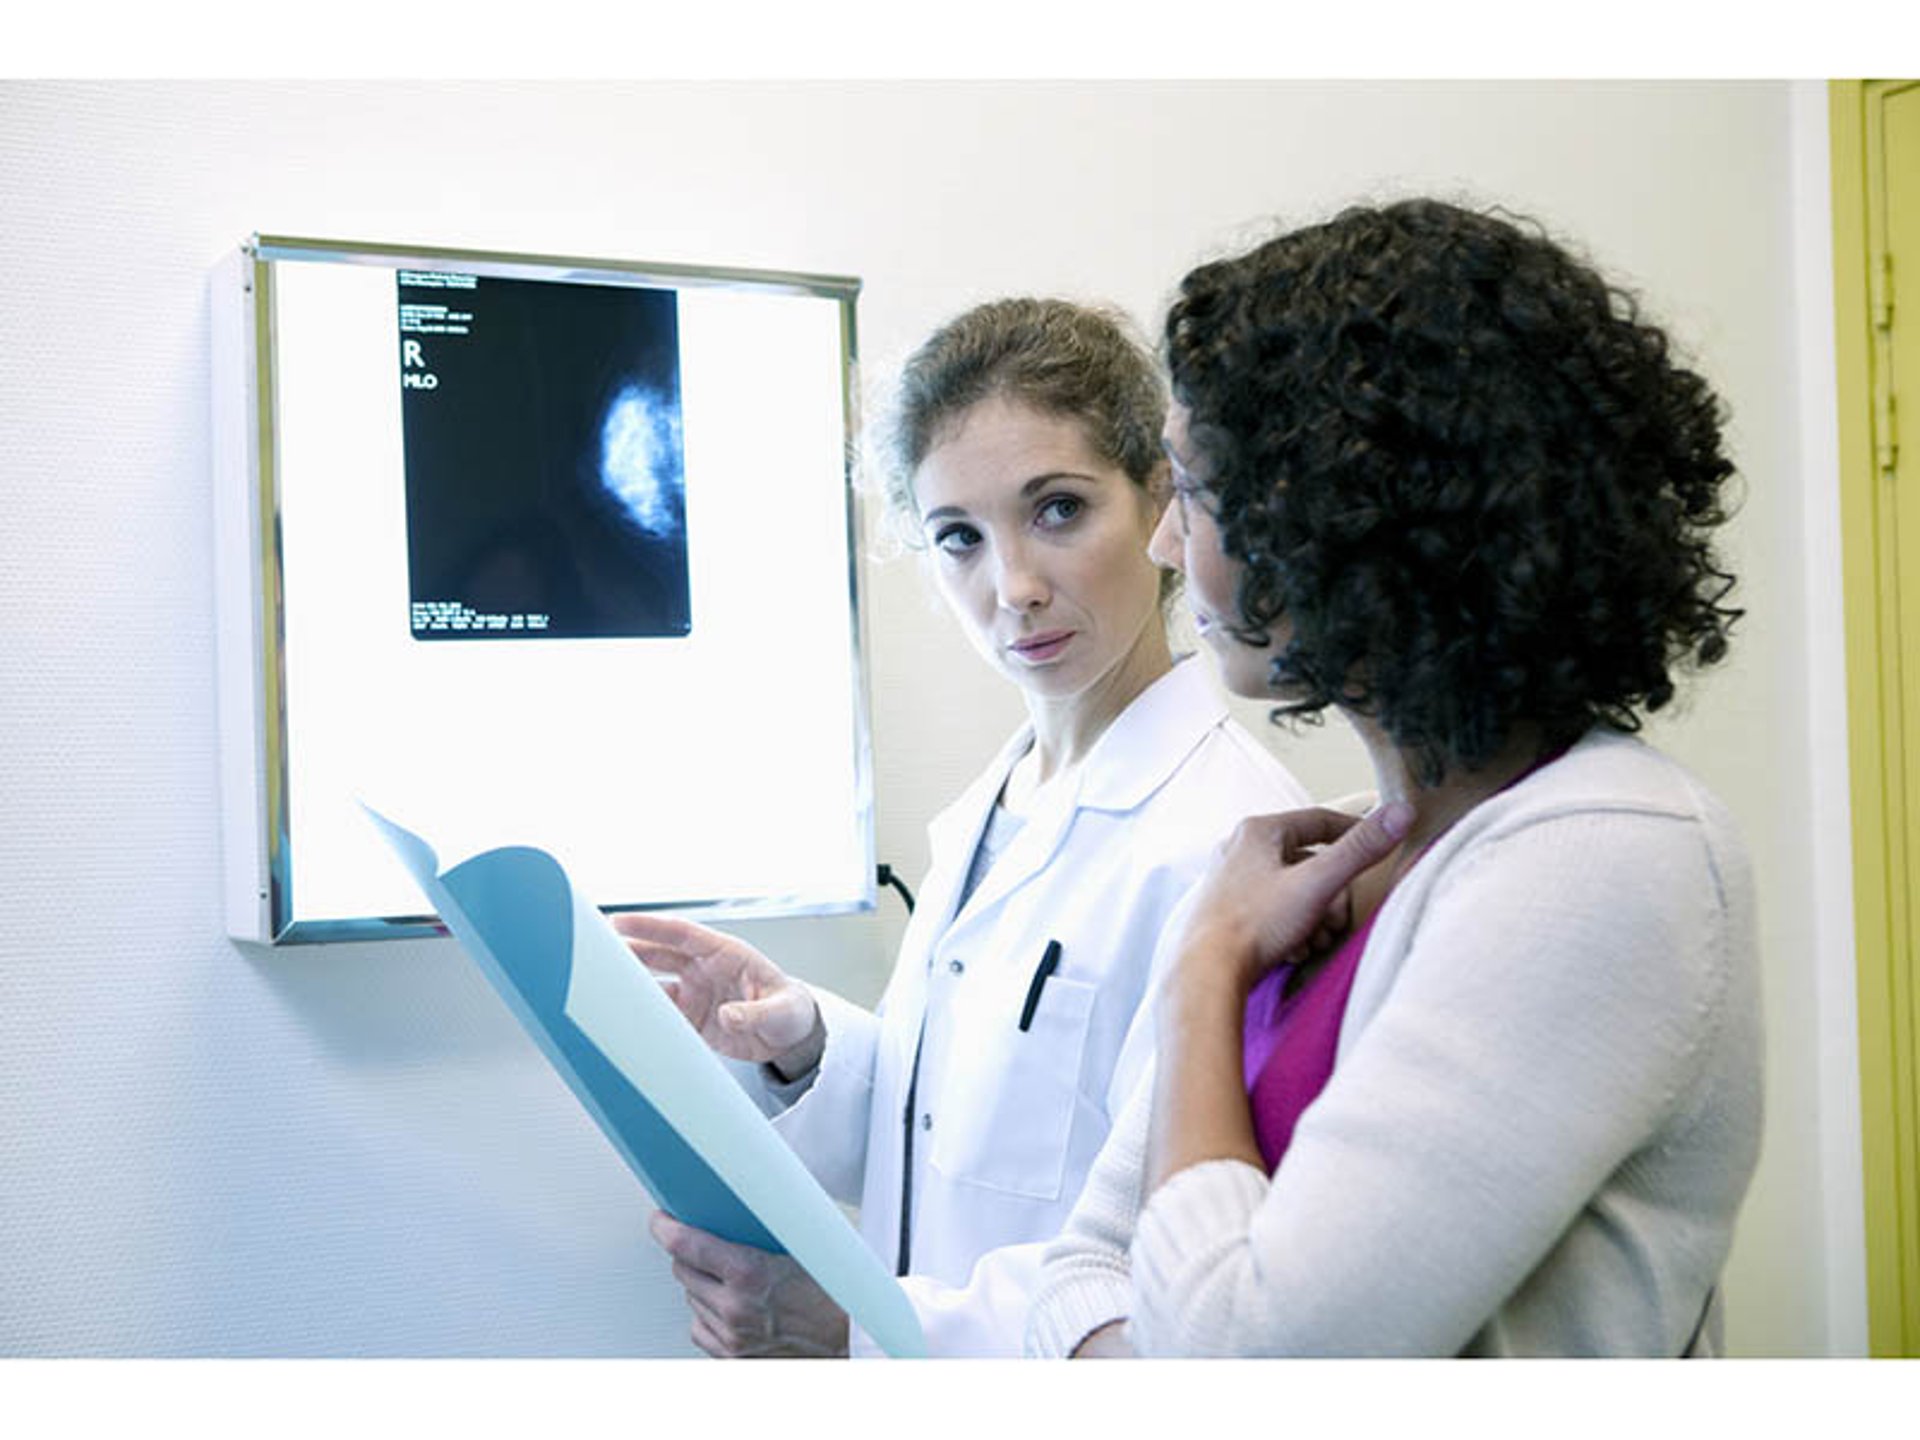 News Picture: High Deductibles Keep Some Women From Follow-Up After Troubling Mammogram